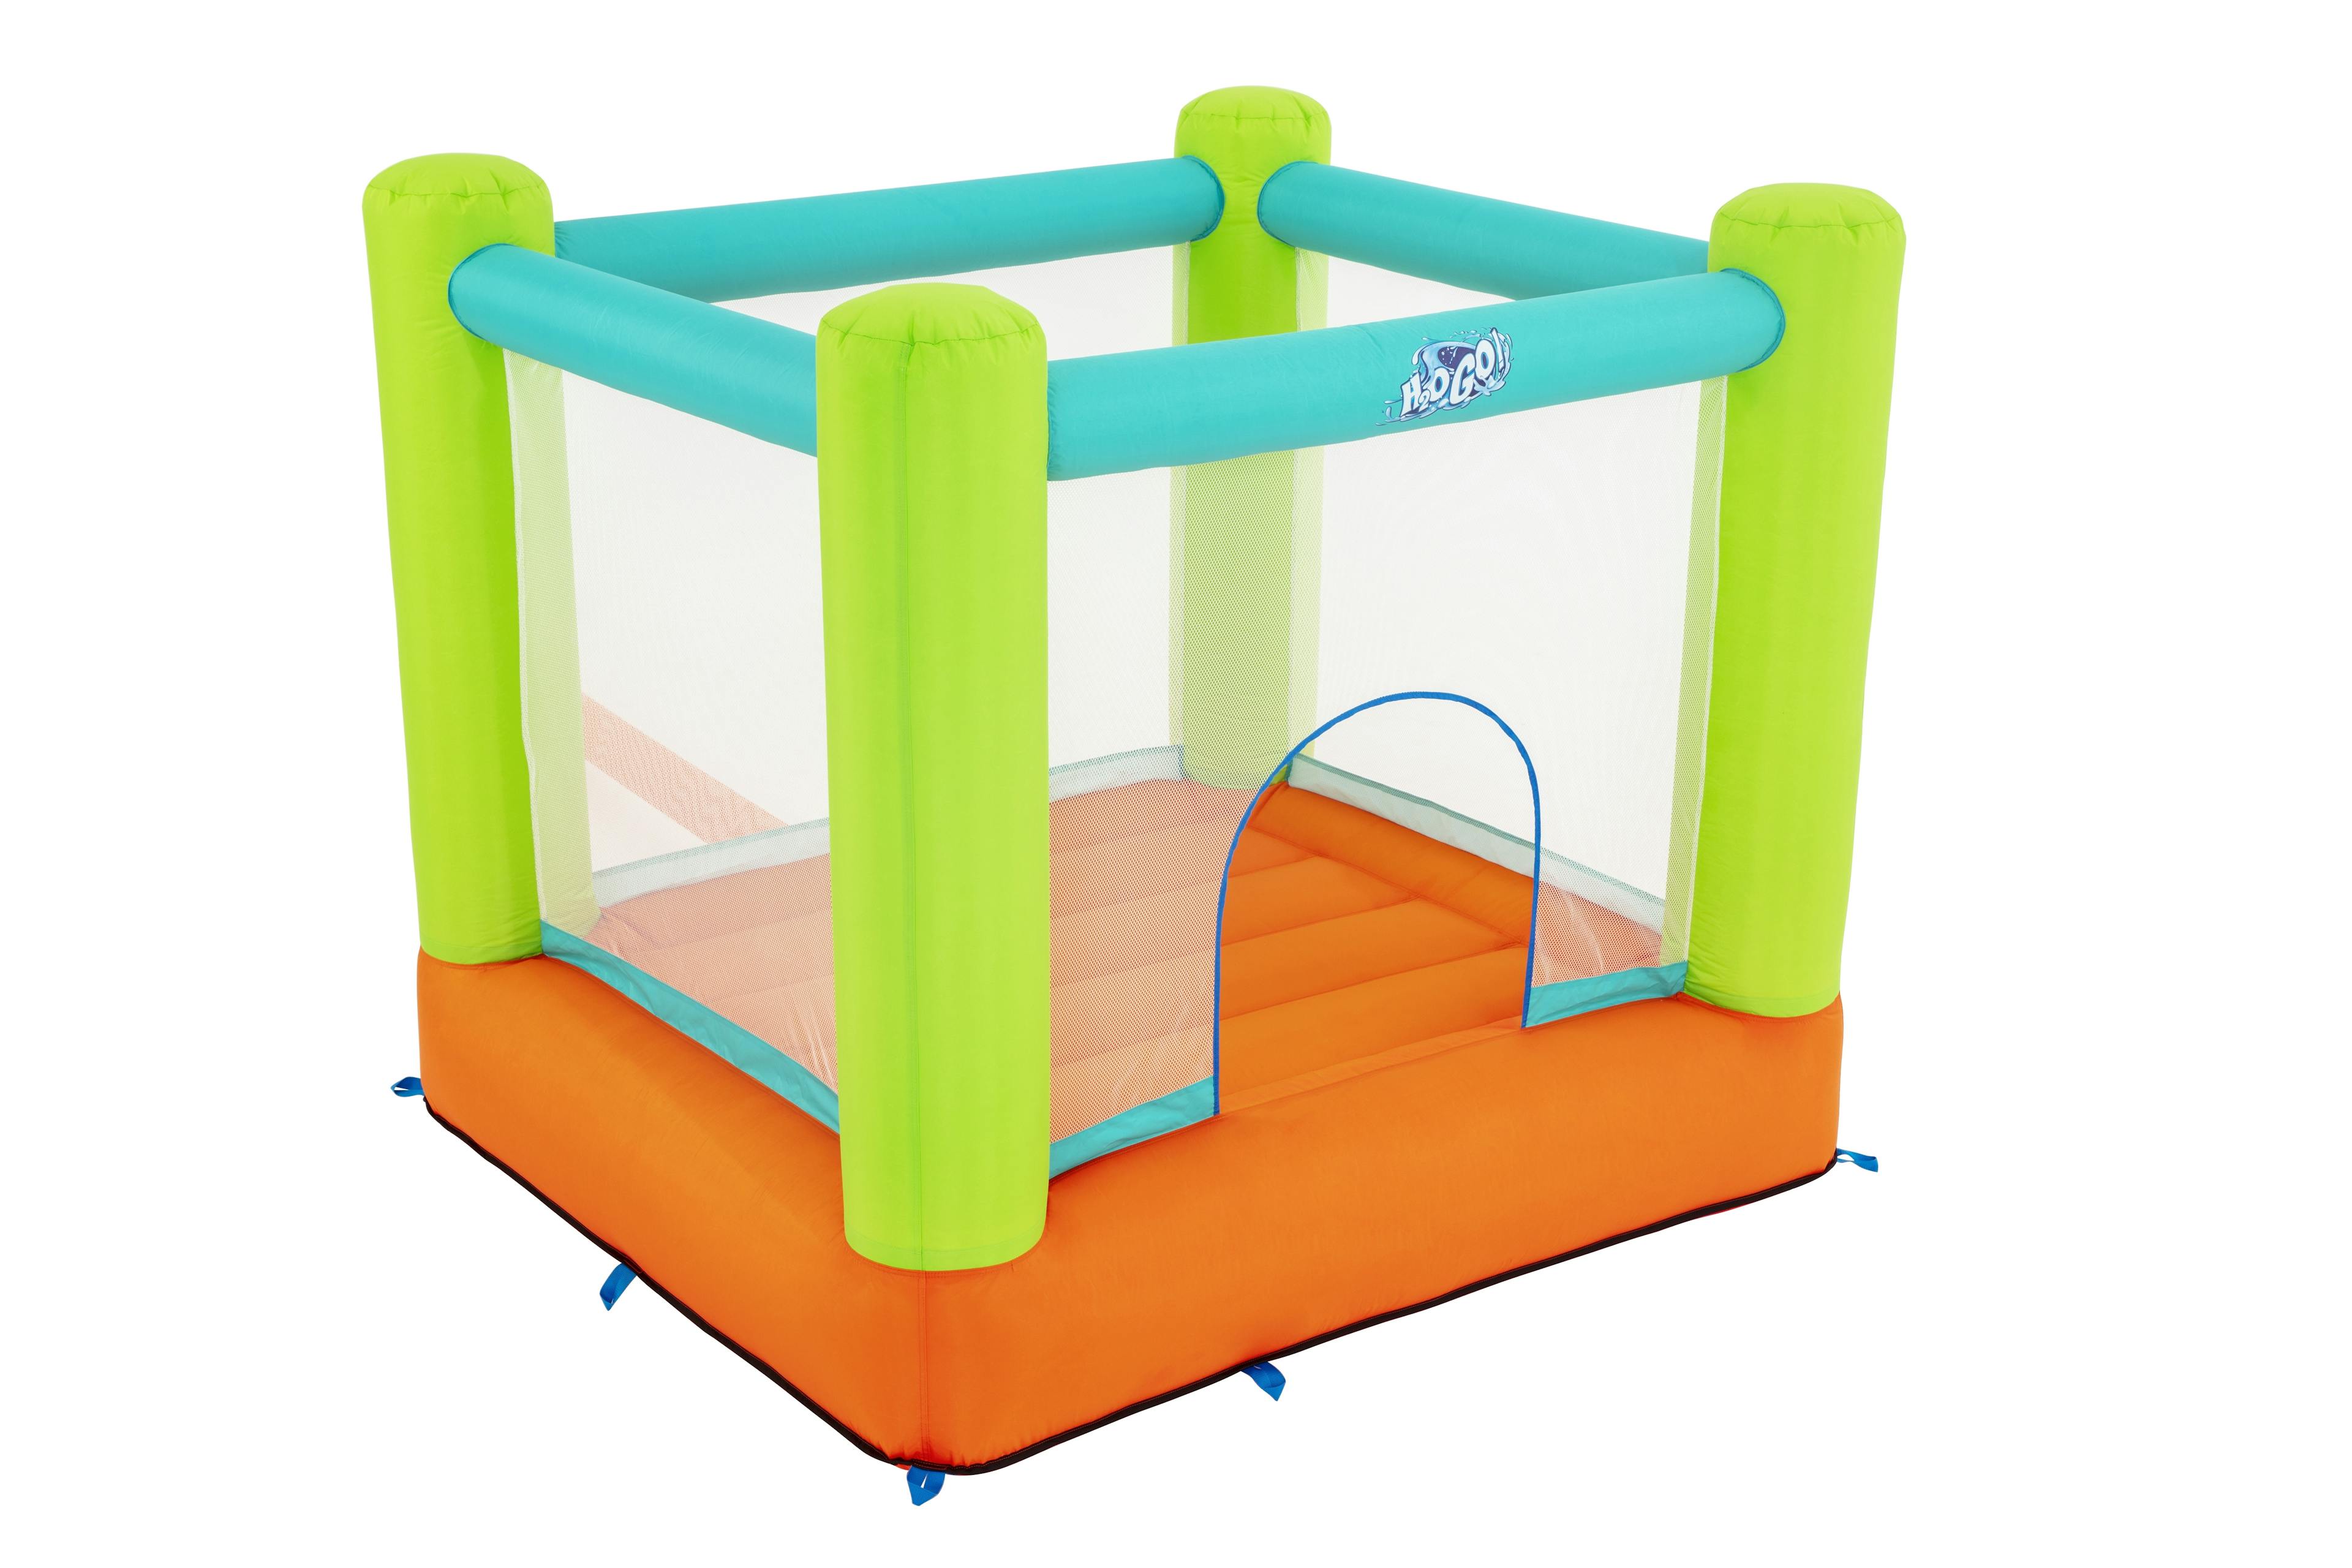 6'4" x 5'9" x 5'7"/1.94m x 1.75m x 1.70m JUMP AND SOAR BOUNCER (Body)